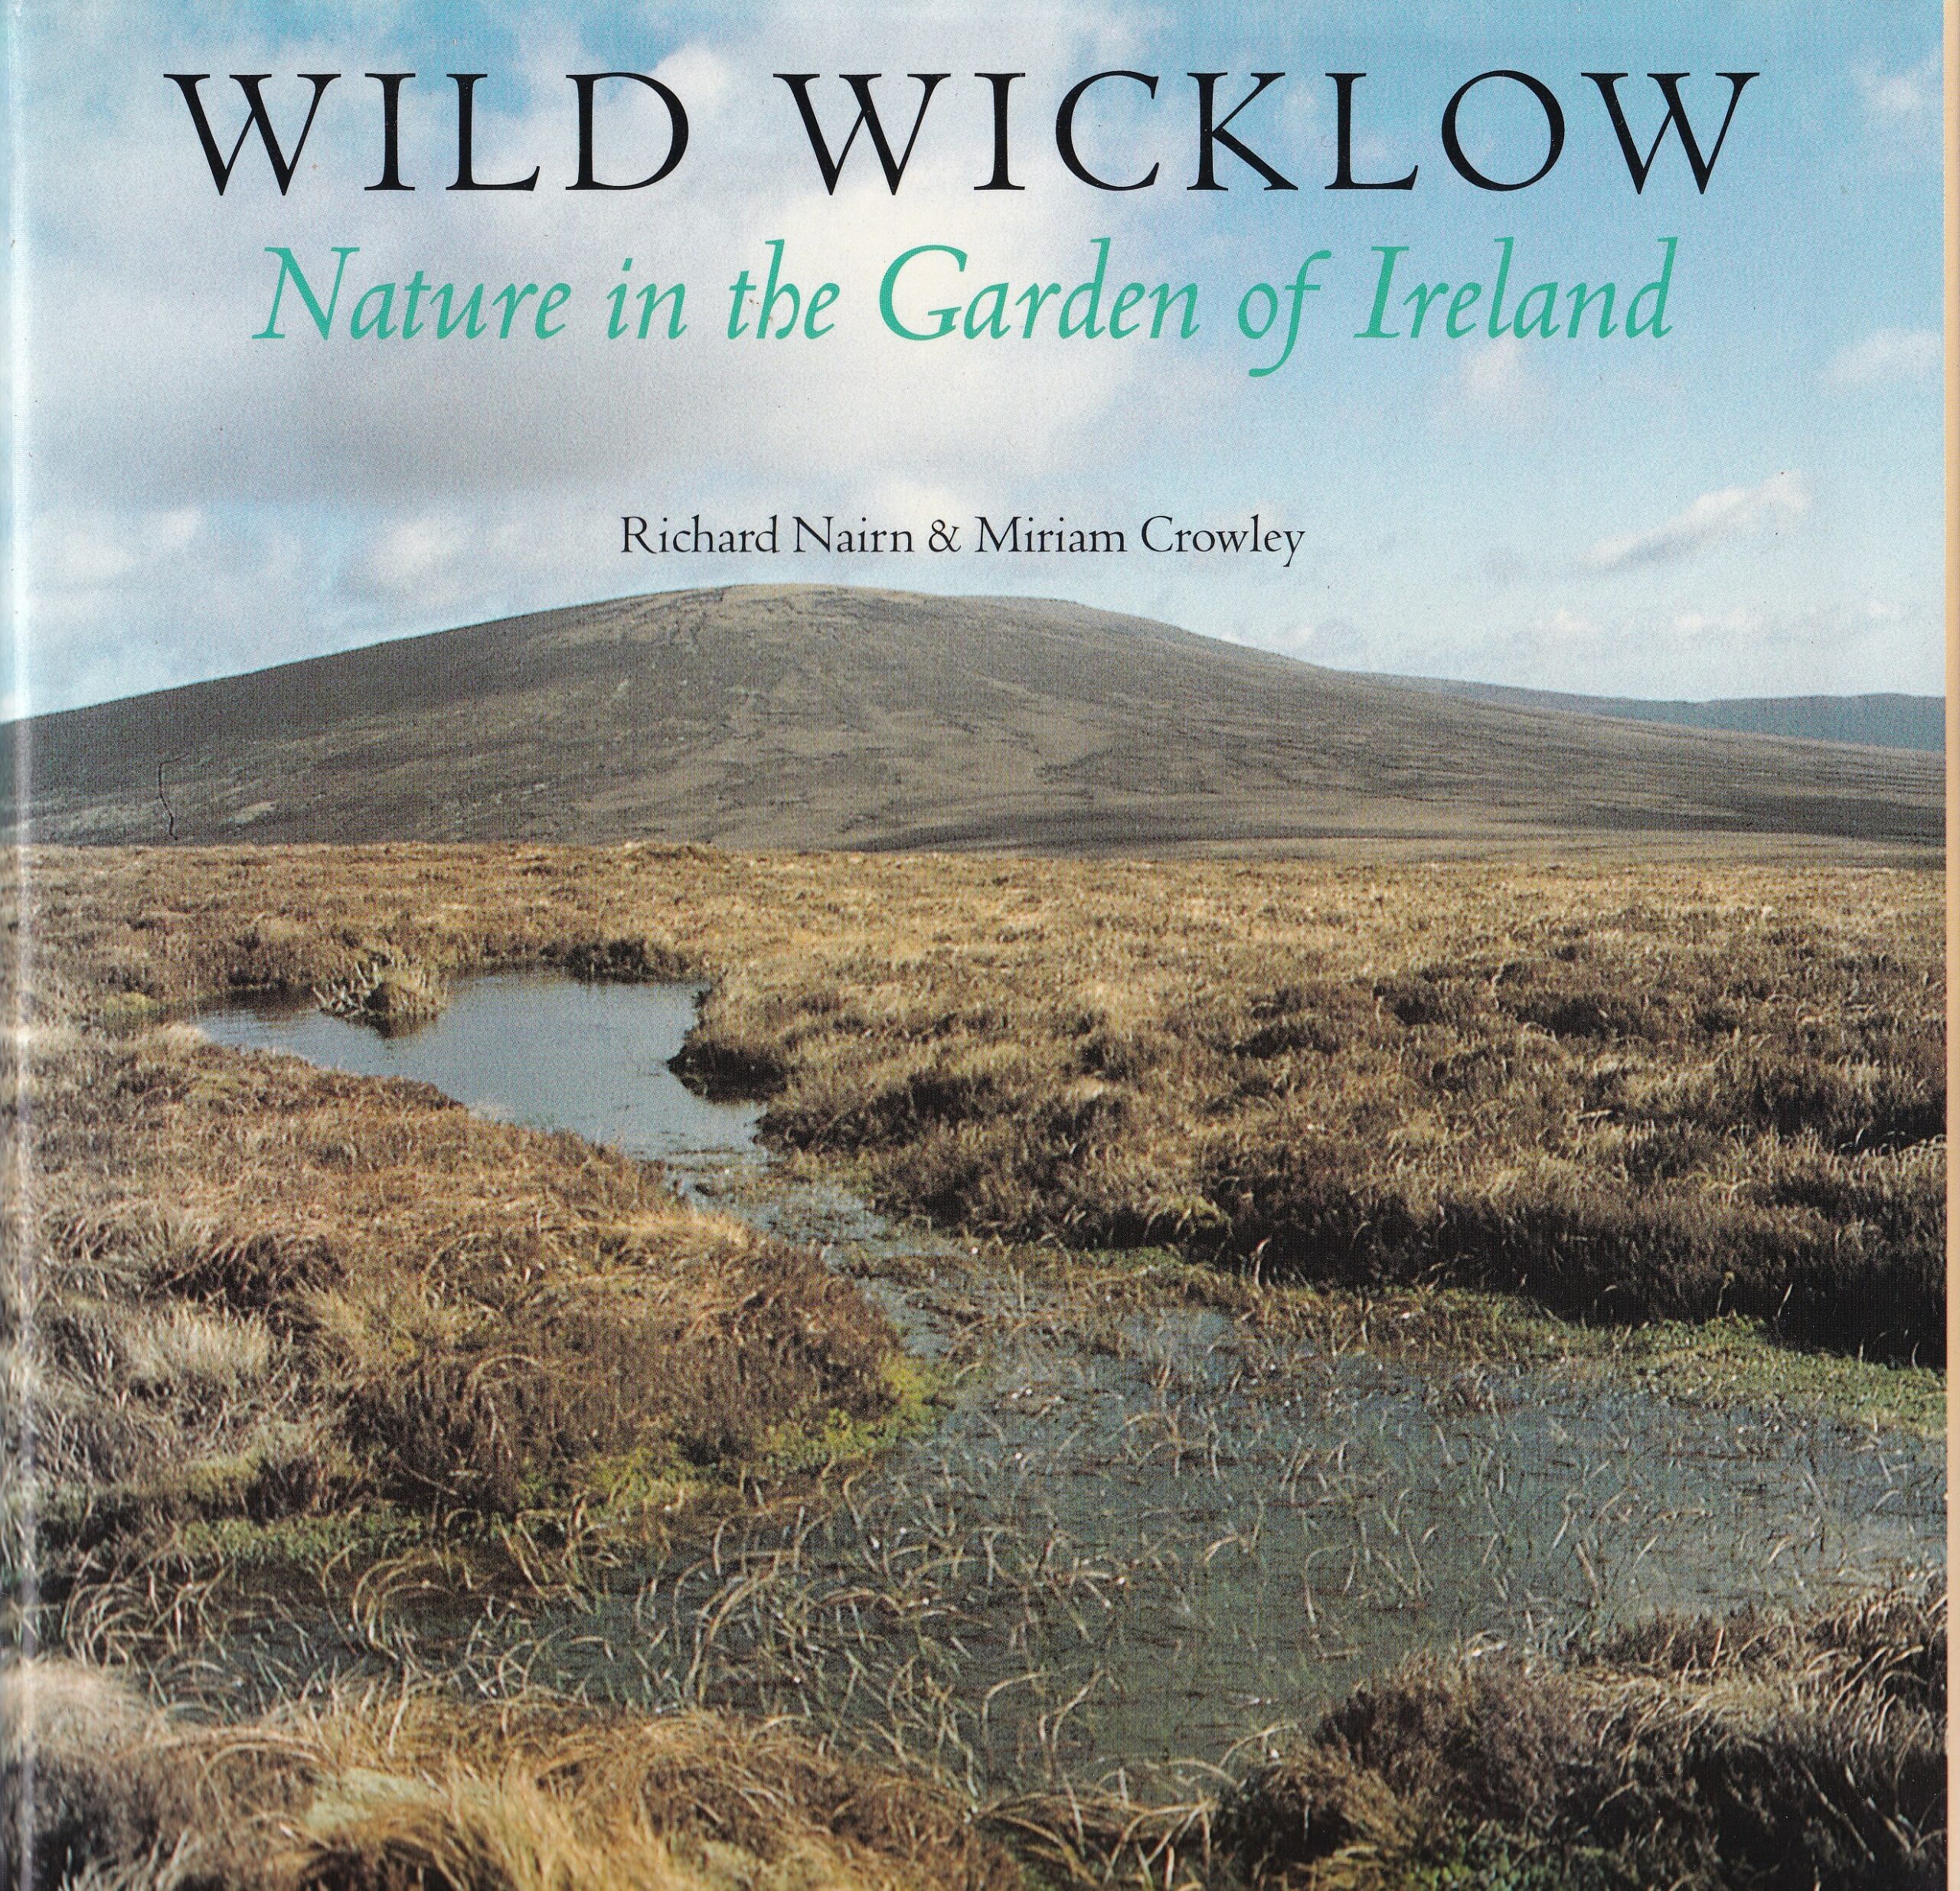 Wild Wicklow: Nature in the Garden of Ireland – Signed by Richard Nairn and Miriam Crowley